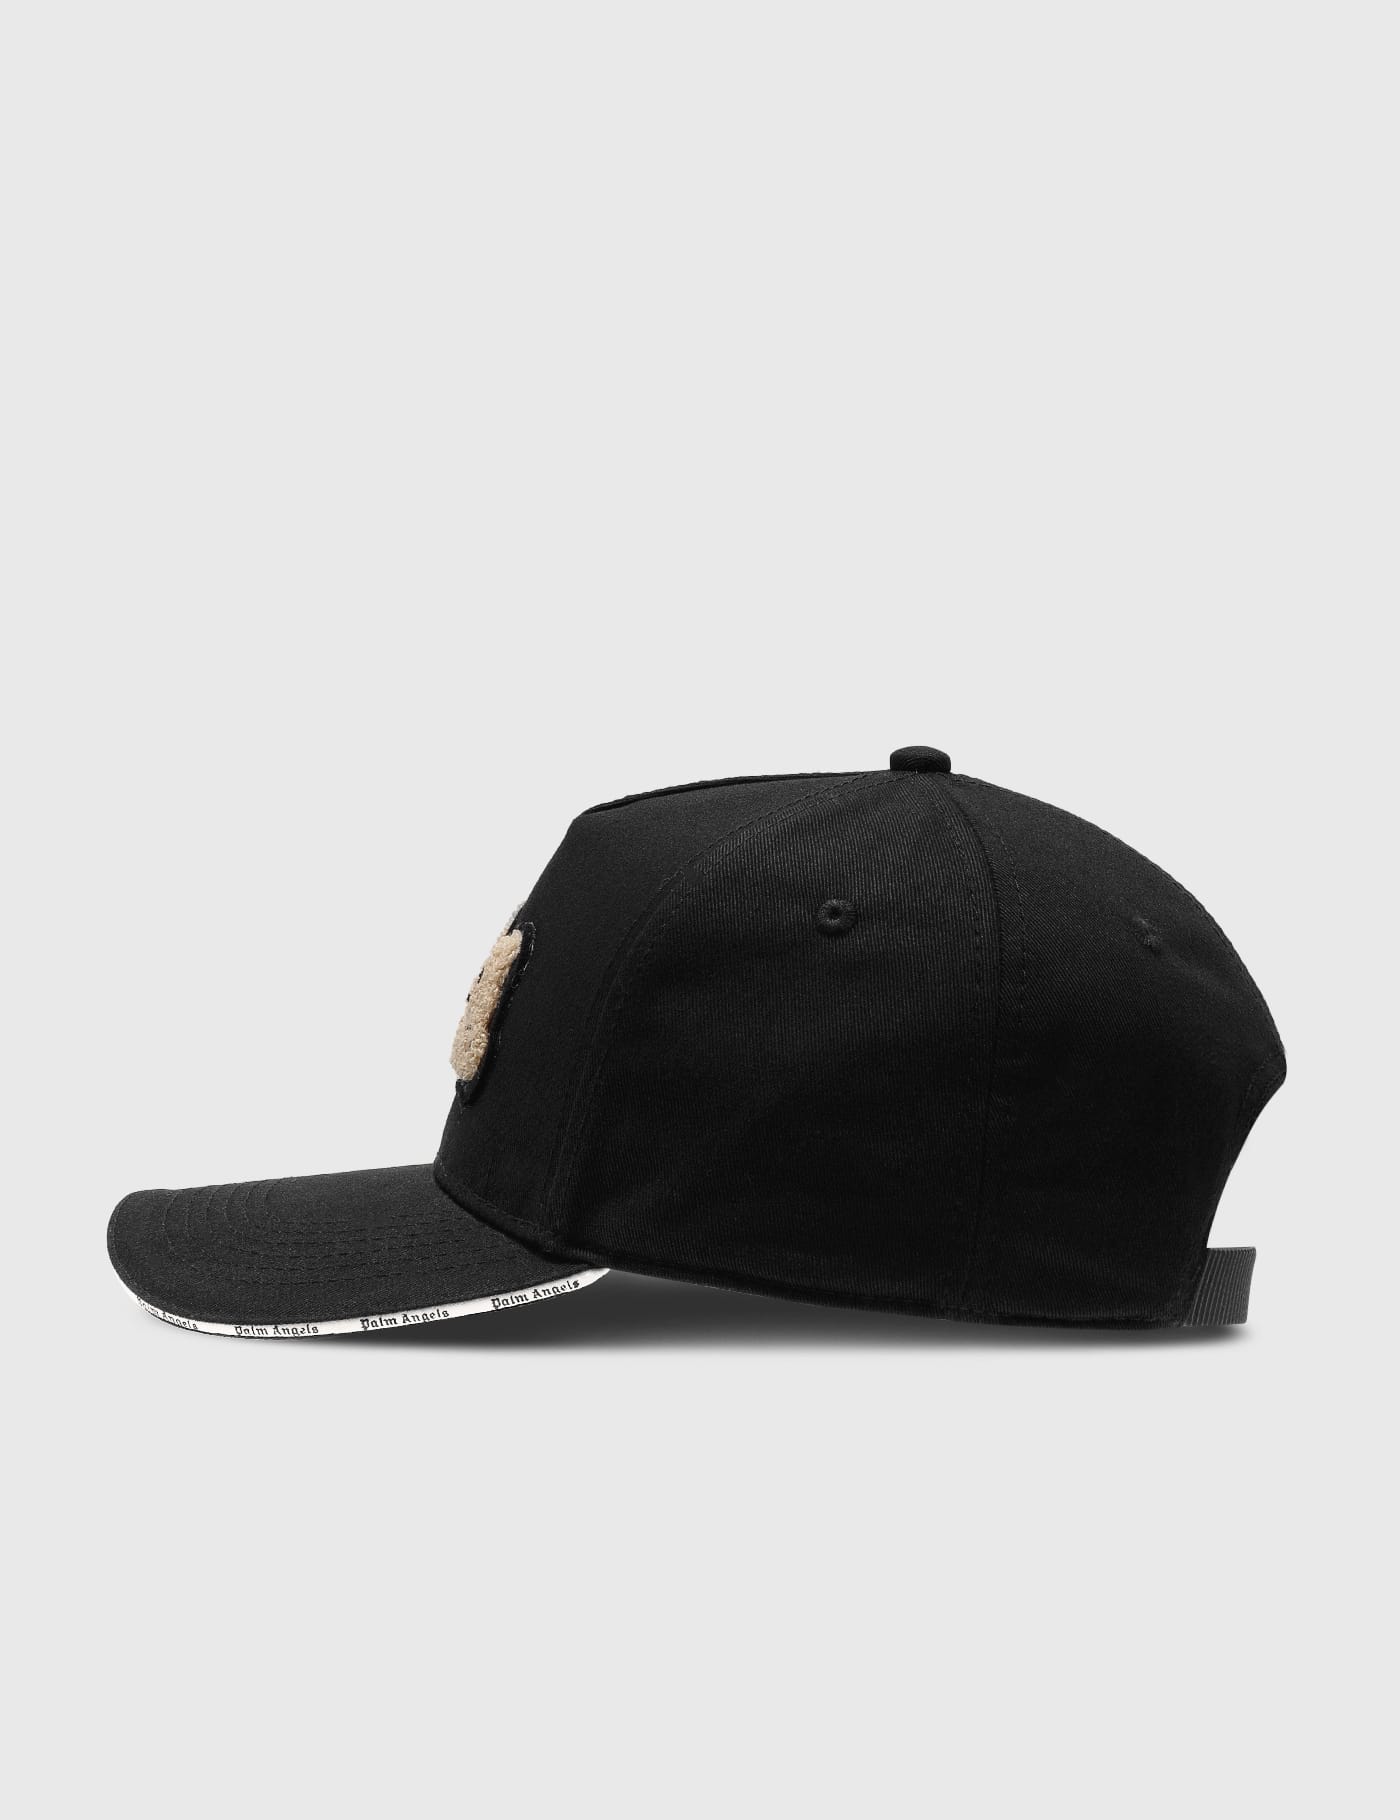 Palm Angels - Palm Angels Bear Cap | HBX - Globally Curated 